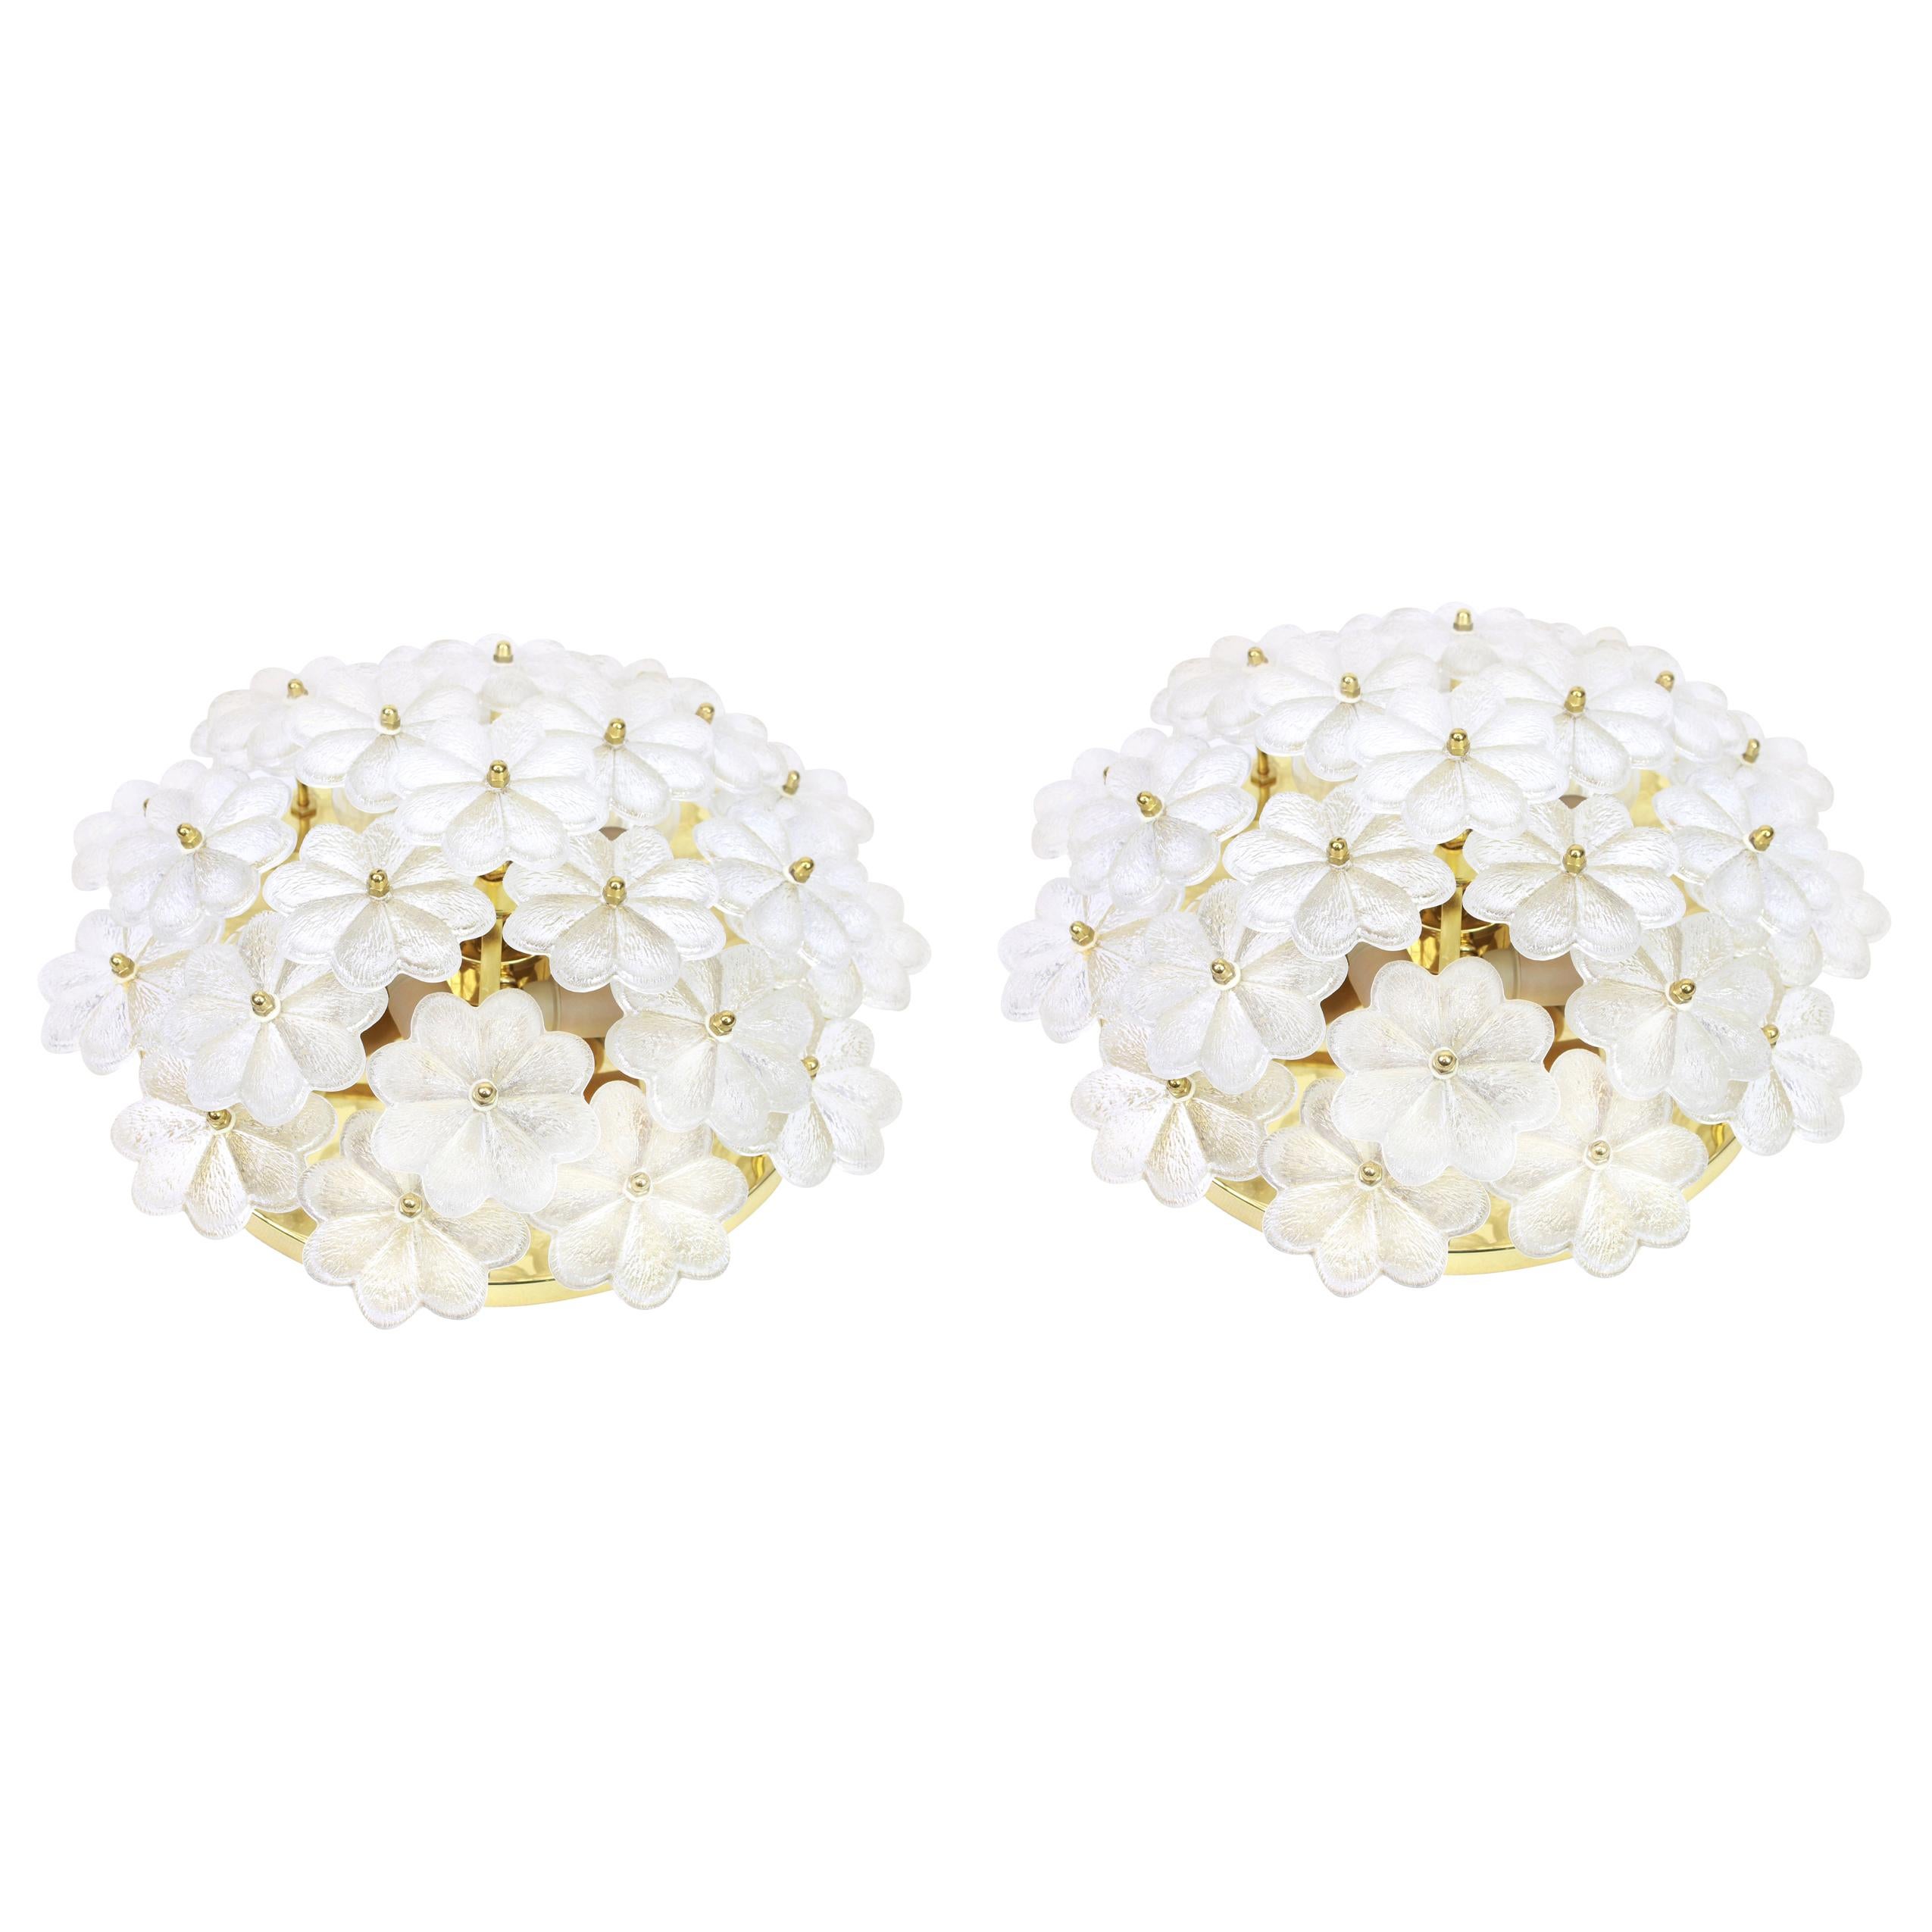 Pair of Stunning Murano Glass Flower Wall Light by Ernst Palme, Germany, 1970s